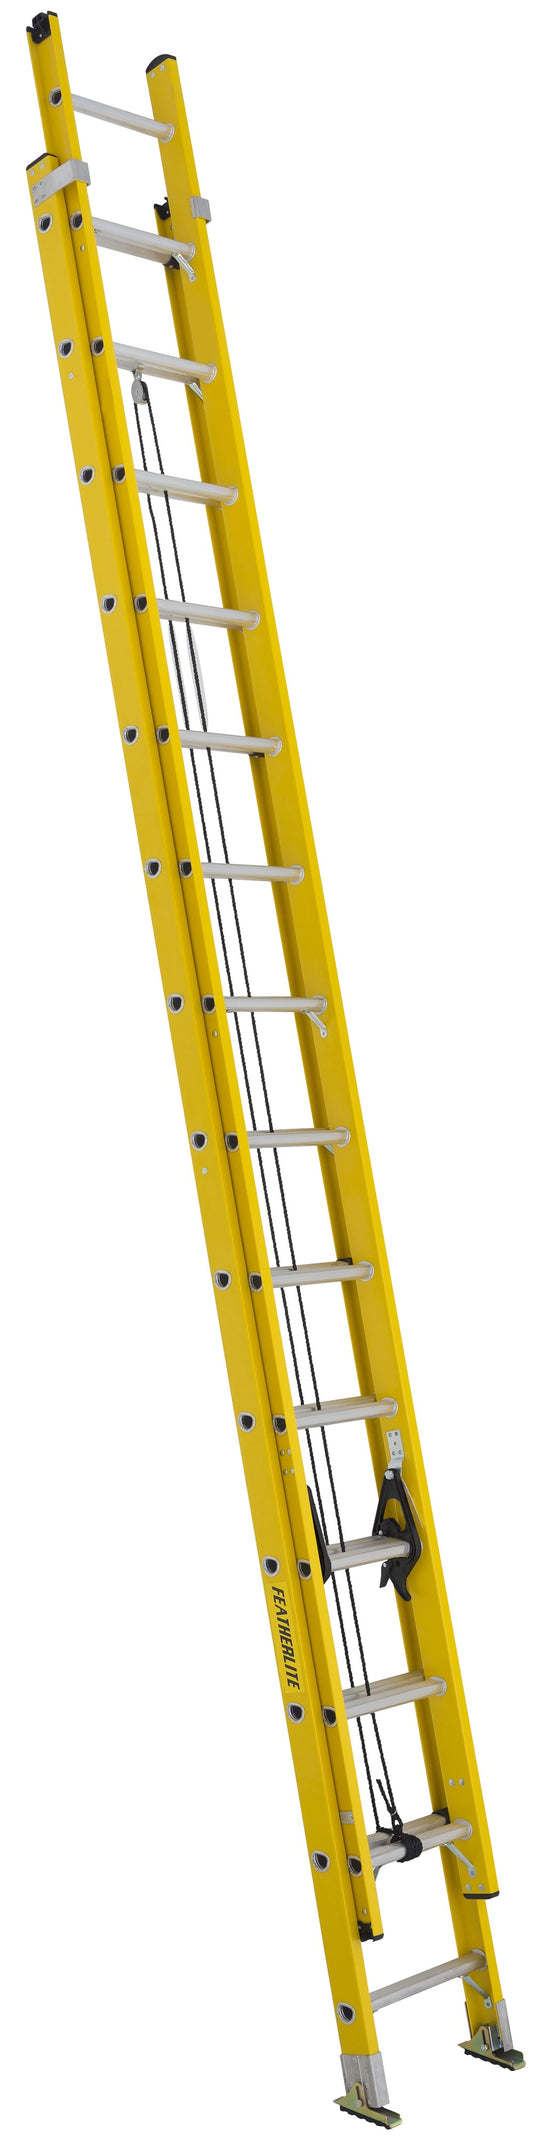 Extension Ladder, Featherlite, 28', 6900 Series, 300 lbs. Grade 1A